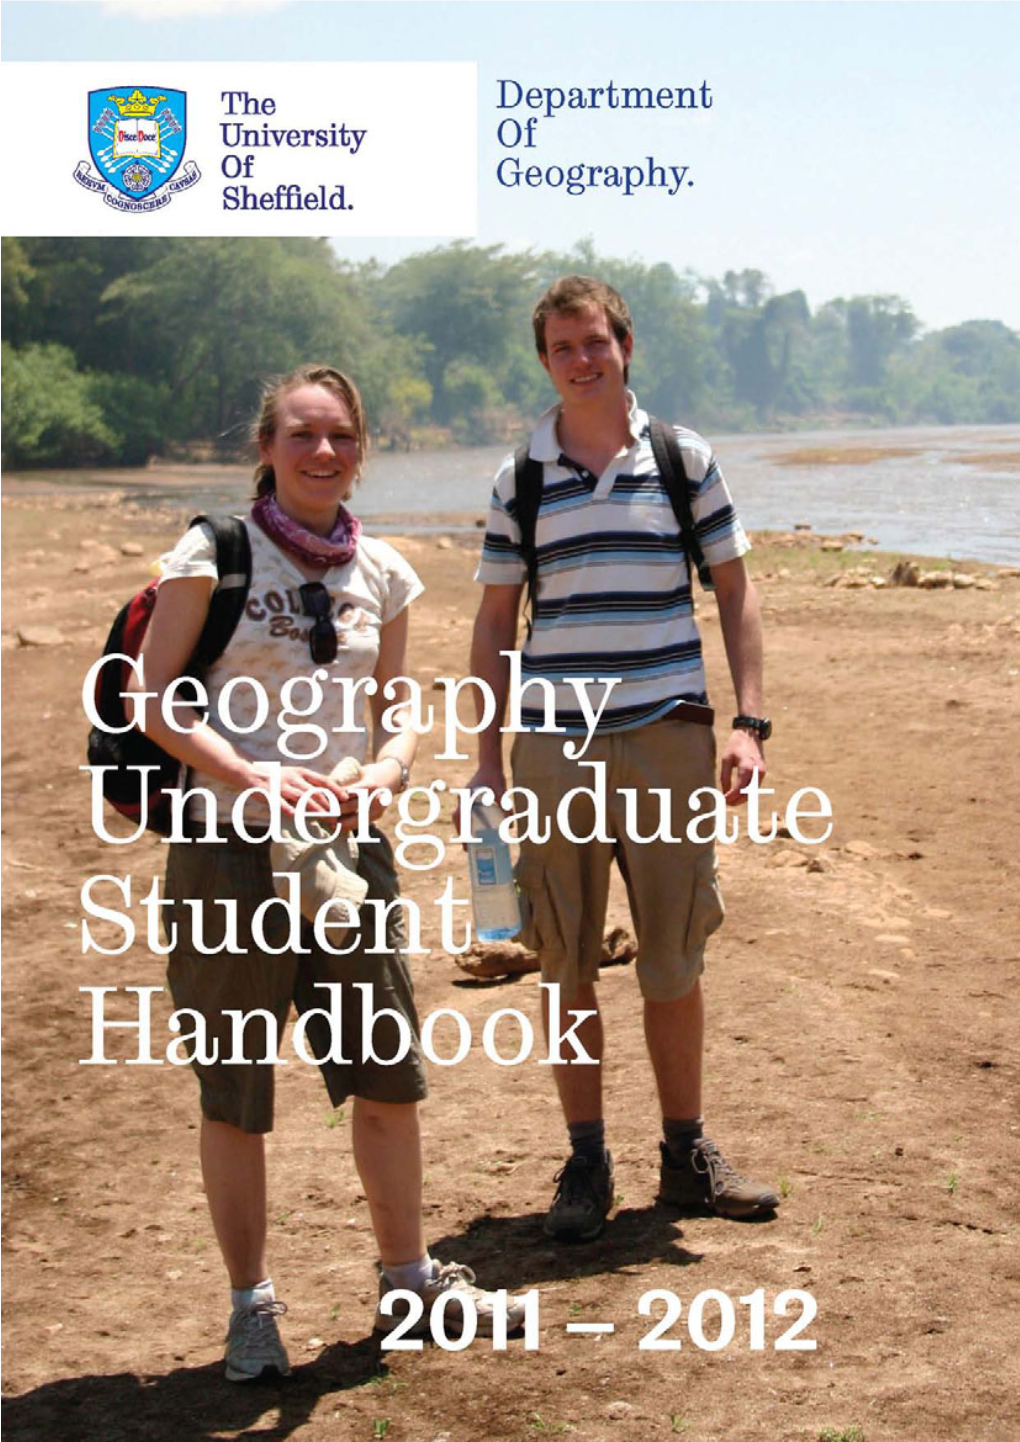 GEO263 Research Design in Physical Geography